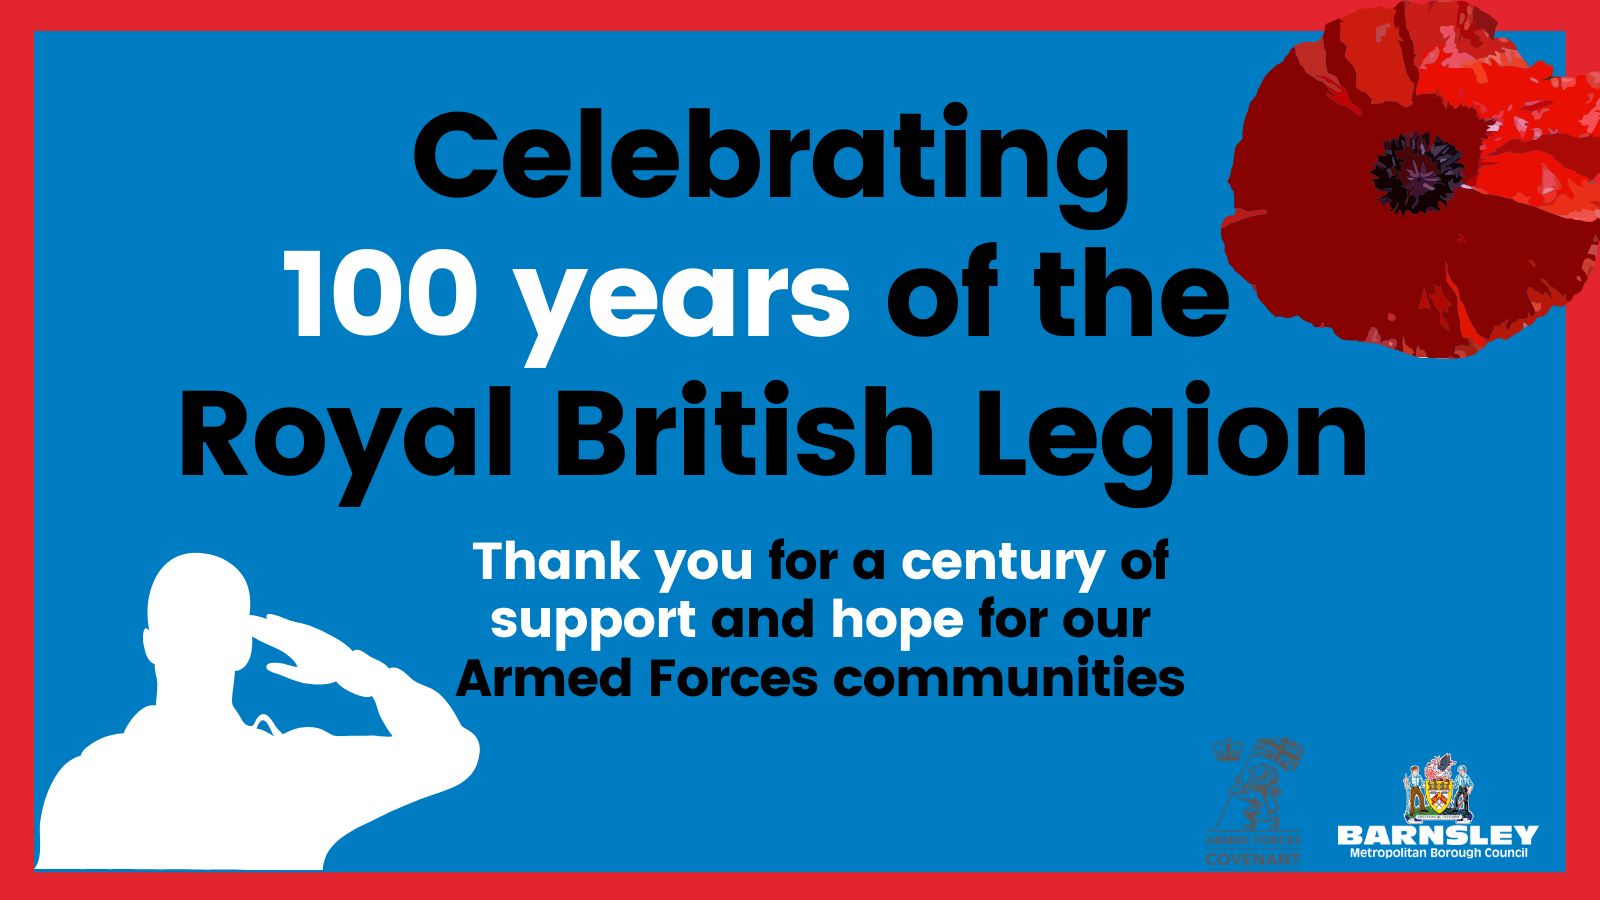 Celebrating 100 years of the Royal British Legion. Thank you for a century of support and hope for our Armed Forces communities. Image of red poppy and silhouette of a saluting soldier